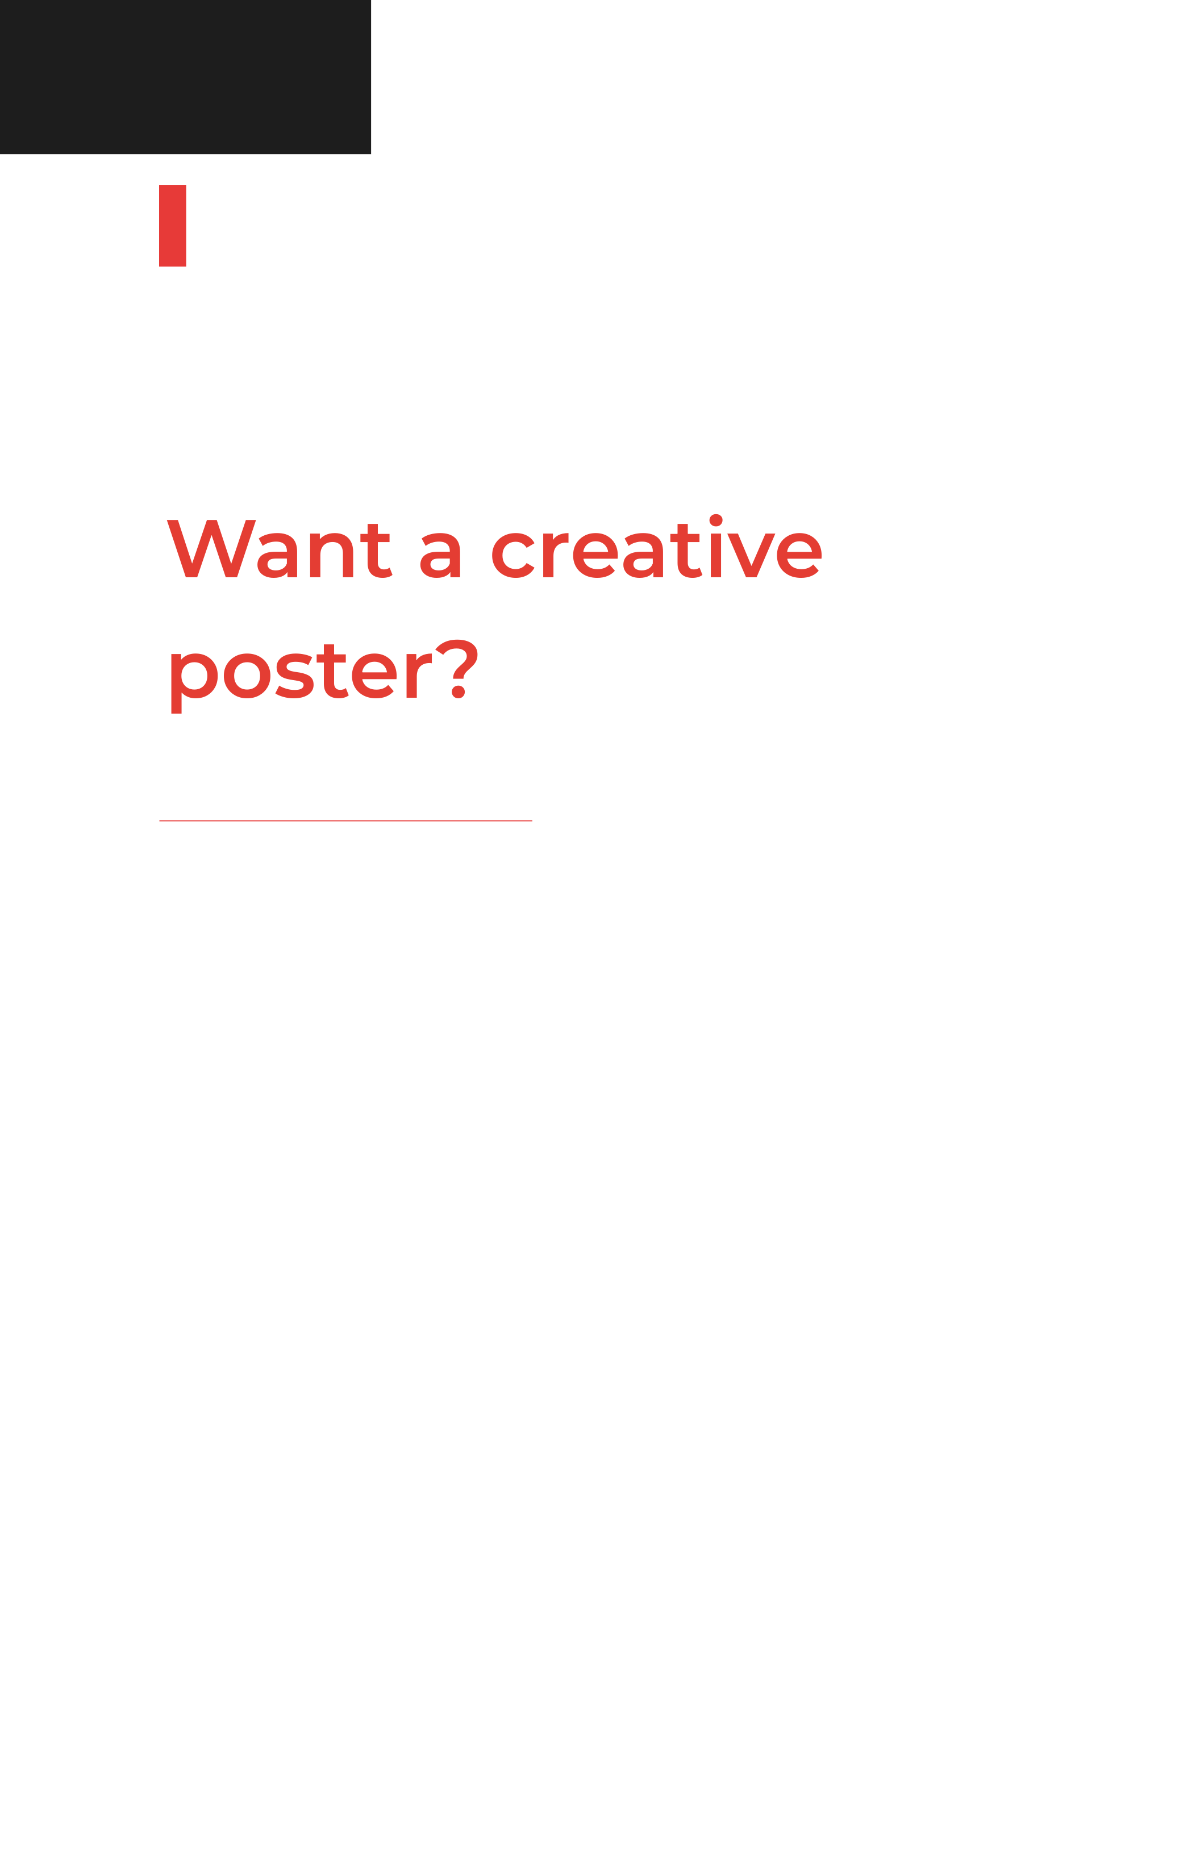 Blank Advertising Agency Poster Template